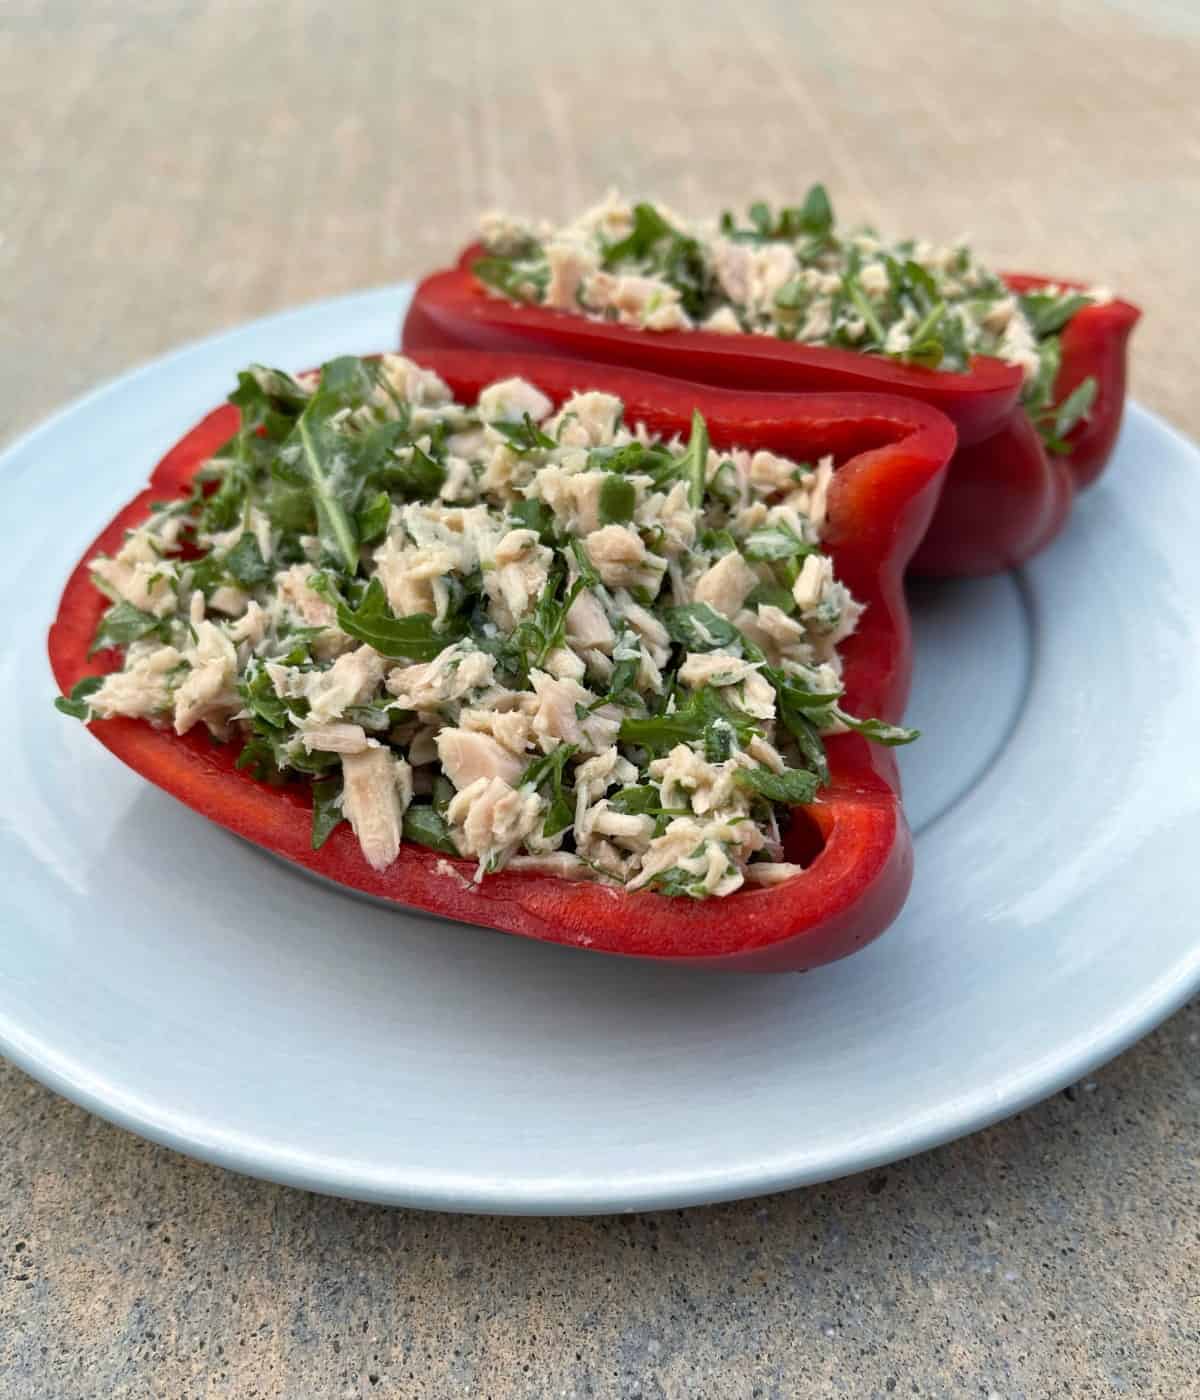 Herbed tuna stuffed red bell peppers on blue plate.